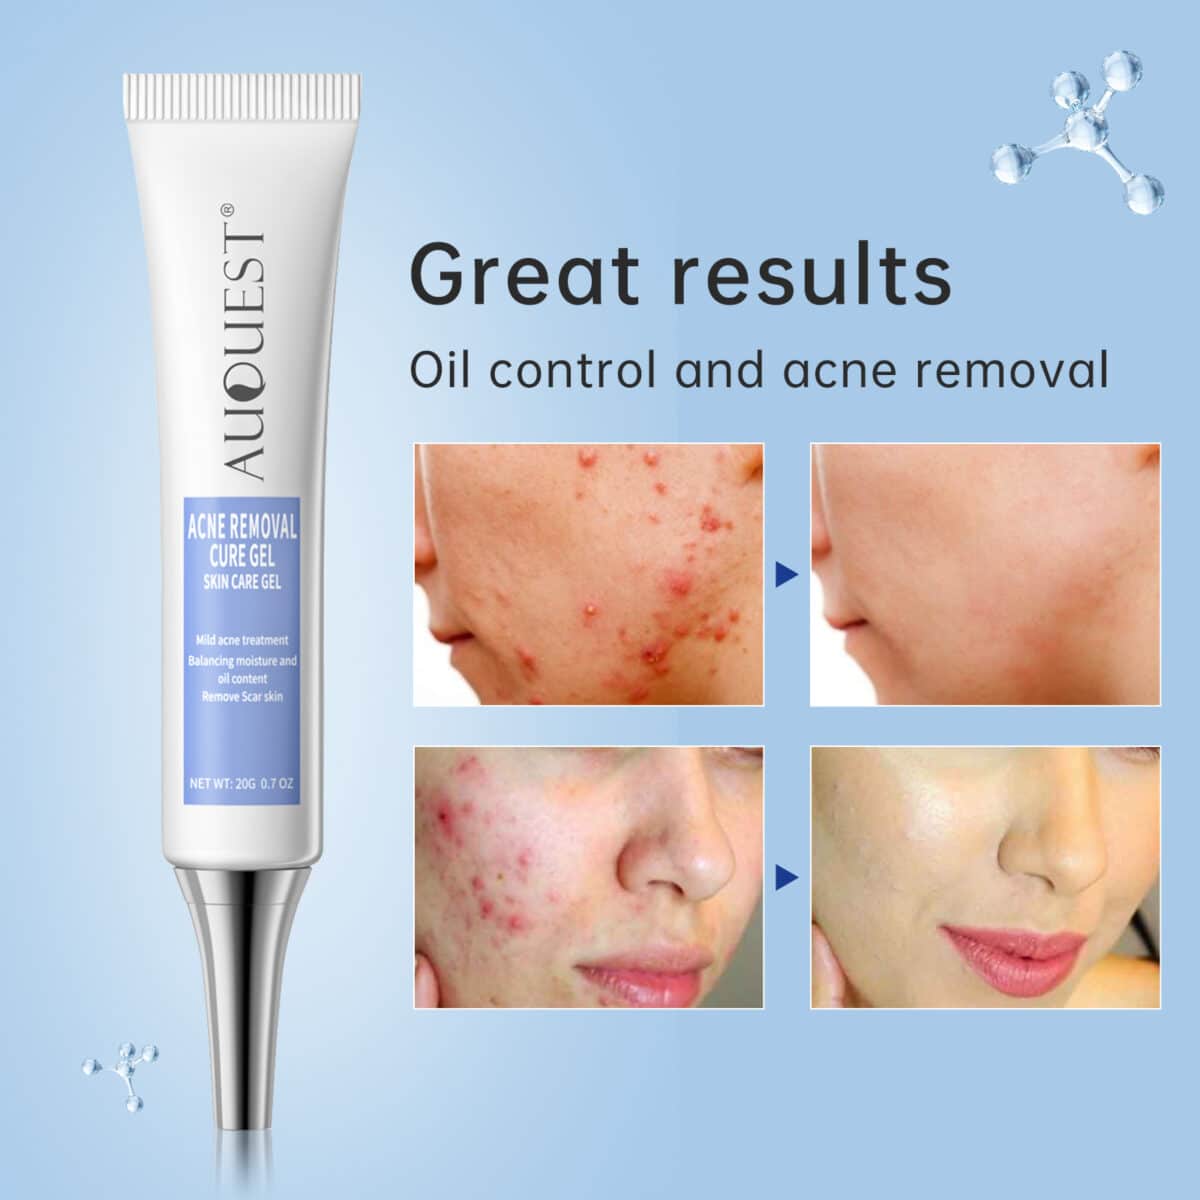 Auquest-herbal-acne-treatment-cream-pimple-spot-removal-for-teens-oil-control-acne-scar-gel-shrink-4